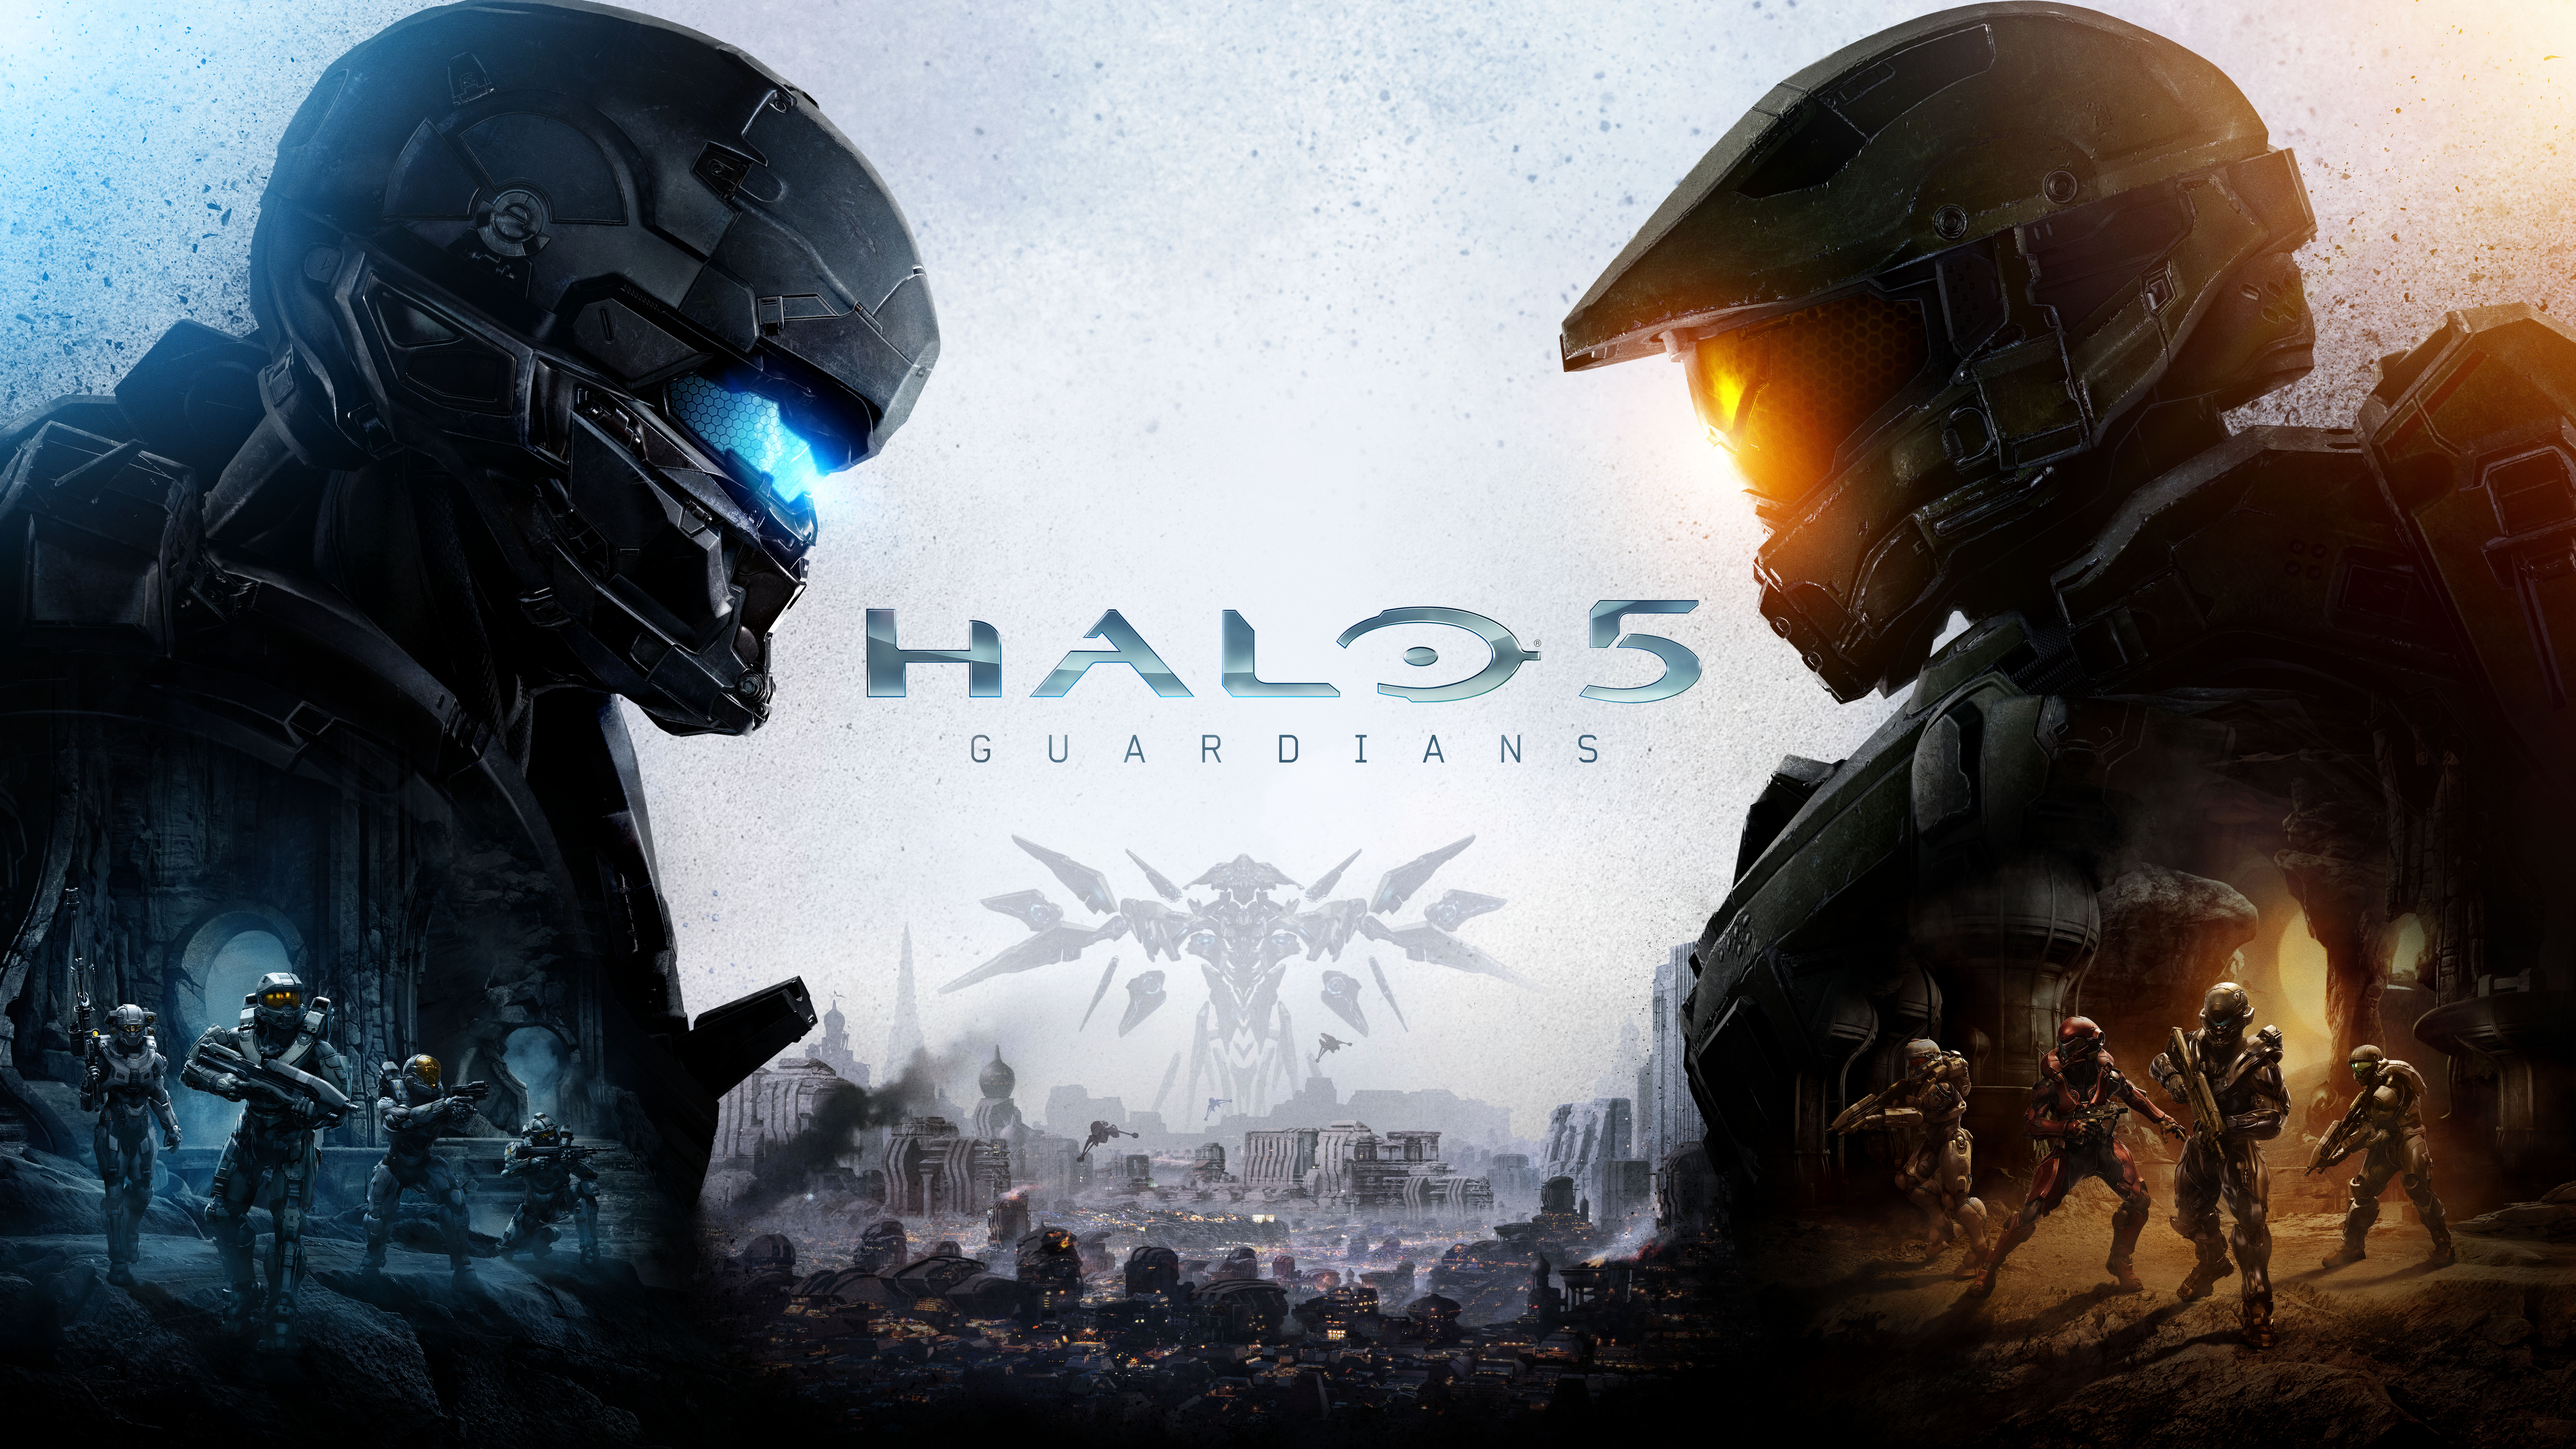 halo 5: guardians, video game, halo, master chief